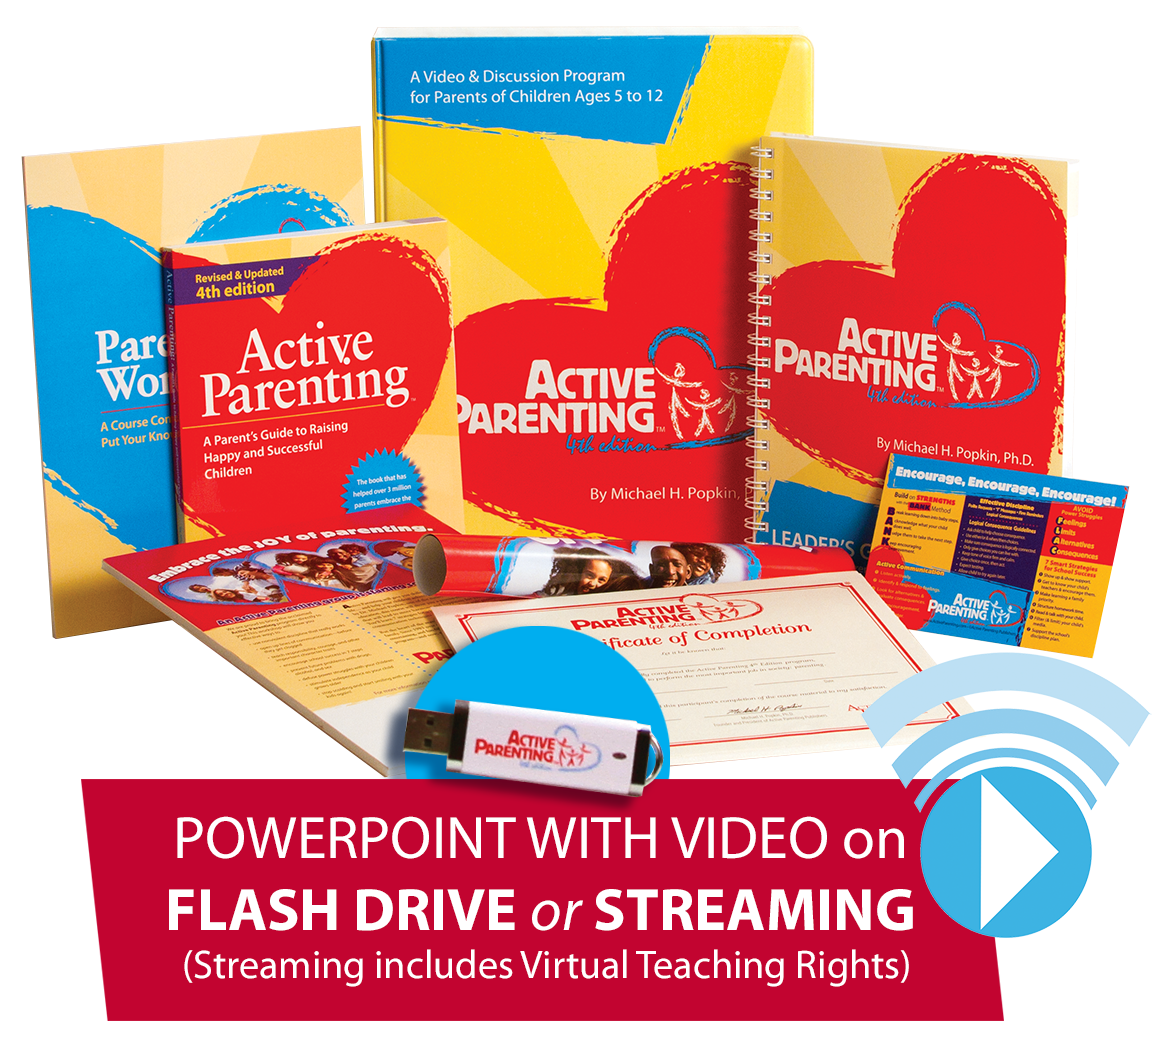 Active Parenting 4th Edition on Flash Drive or Streaming